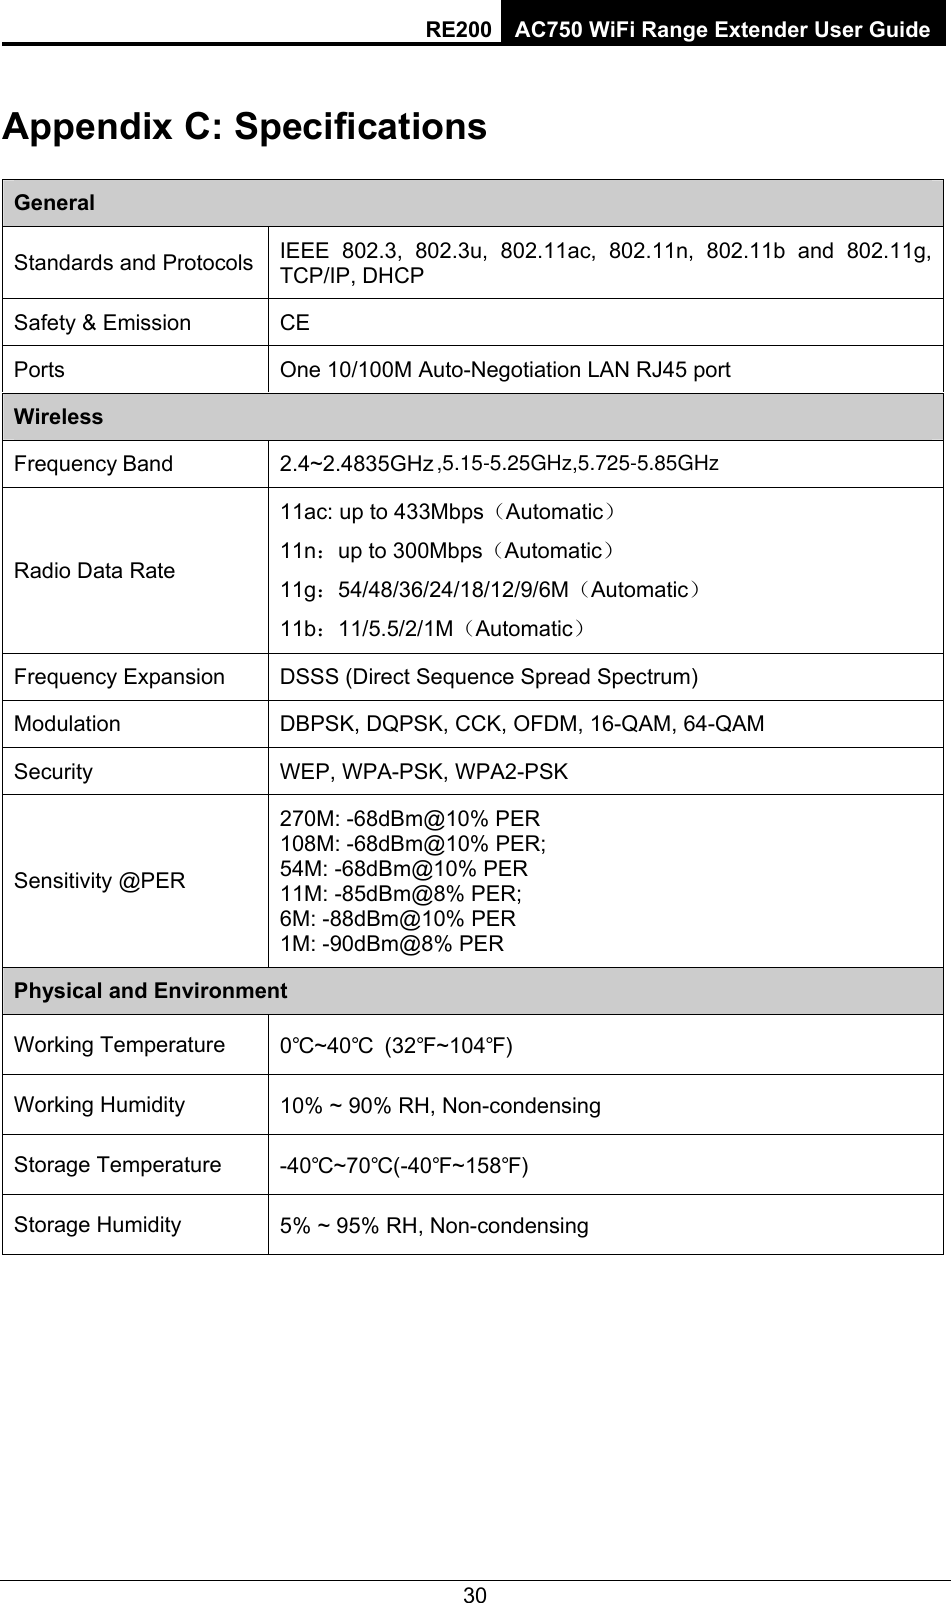 RE200 AC750 WiFi Range Extender User Guide Appendix C: Specifications General Standards and Protocols  IEEE 802.3, 802.3u, 802.11ac, 802.11n, 802.11b and 802.11g, TCP/IP, DHCP Safety &amp; Emission  CE Ports  One 10/100M Auto-Negotiation LAN RJ45 port Wireless Frequency Band 2.4~2.4835GHz Radio Data Rate 11ac: up to 433Mbps（Automatic） 11n：up to 300Mbps（Automatic） 11g：54/48/36/24/18/12/9/6M（Automatic） 11b：11/5.5/2/1M（Automatic） Frequency Expansion  DSSS (Direct Sequence Spread Spectrum) Modulation  DBPSK, DQPSK, CCK, OFDM, 16-QAM, 64-QAM Security  WEP, WPA-PSK, WPA2-PSK Sensitivity @PER 270M: -68dBm@10% PER 108M: -68dBm@10% PER;   54M: -68dBm@10% PER 11M: -85dBm@8% PER;   6M: -88dBm@10% PER 1M: -90dBm@8% PER Physical and Environment Working Temperature 0℃~40℃  (32℉~104℉) Working Humidity  10% ~ 90% RH, Non-condensing Storage Temperature  -40℃~70℃(-40℉~158℉) Storage Humidity  5% ~ 95% RH, Non-condensing  30 5.15-5.25GHz,5.725-5.85GHz,5.15-5.25GHz,5.725-5.85GHz